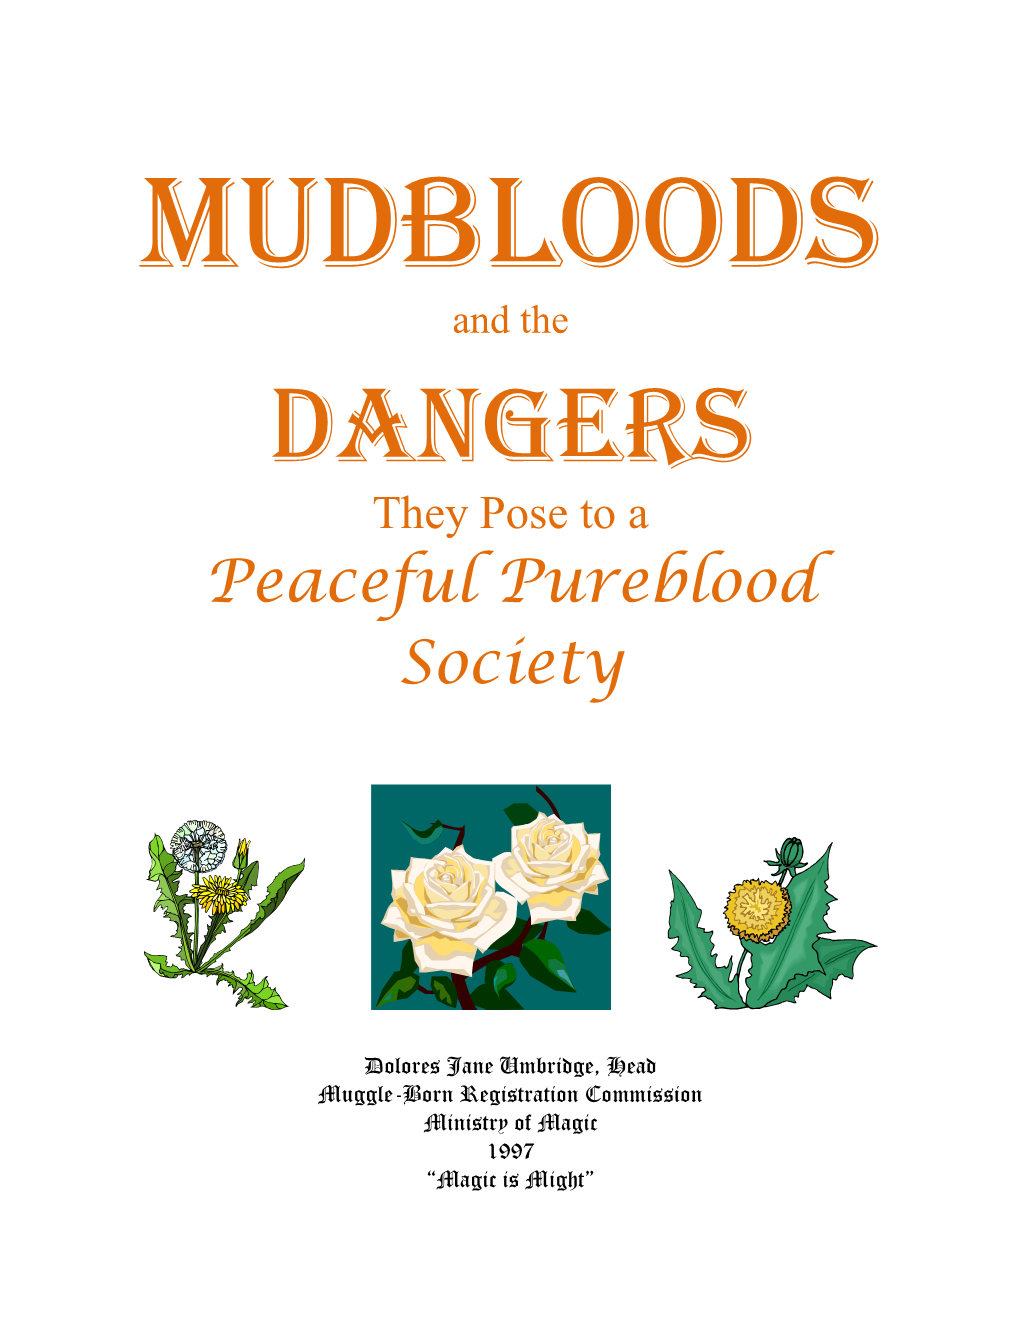 Mudbloods and the Dangers They Pose to a Peaceful Pureblood Society